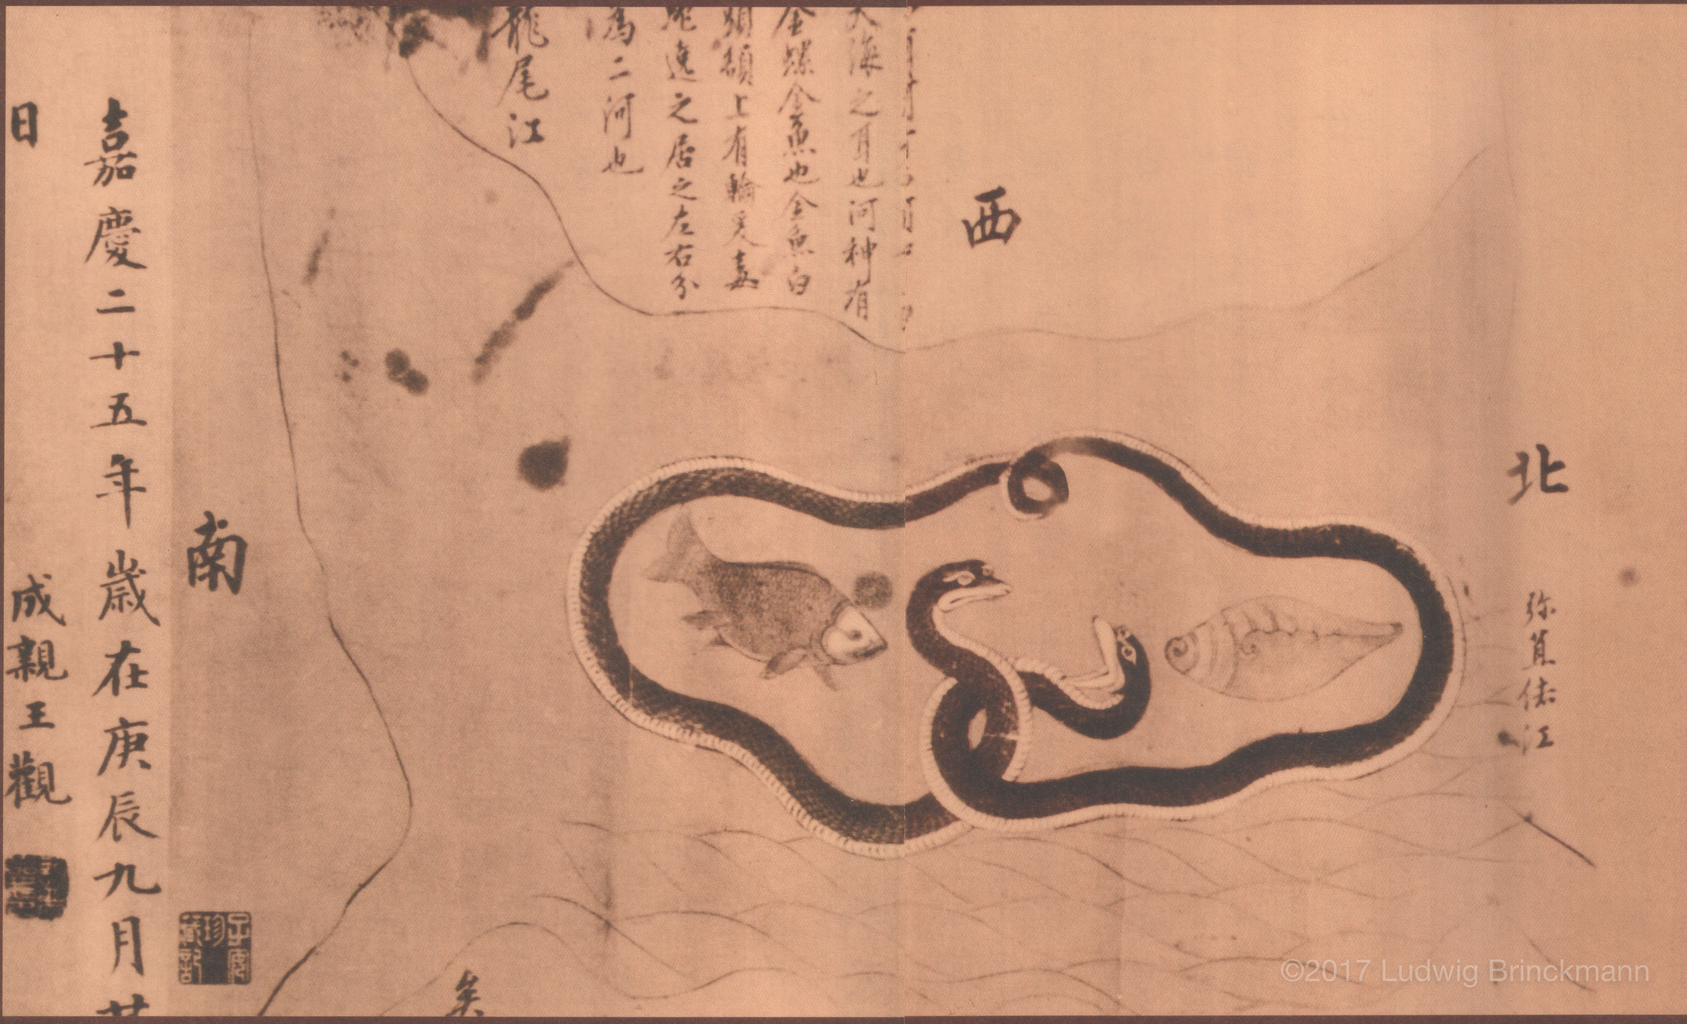 Picture: The earliest known map of Erhai, in the 南诏图传 picture scroll produced in 899 AD.